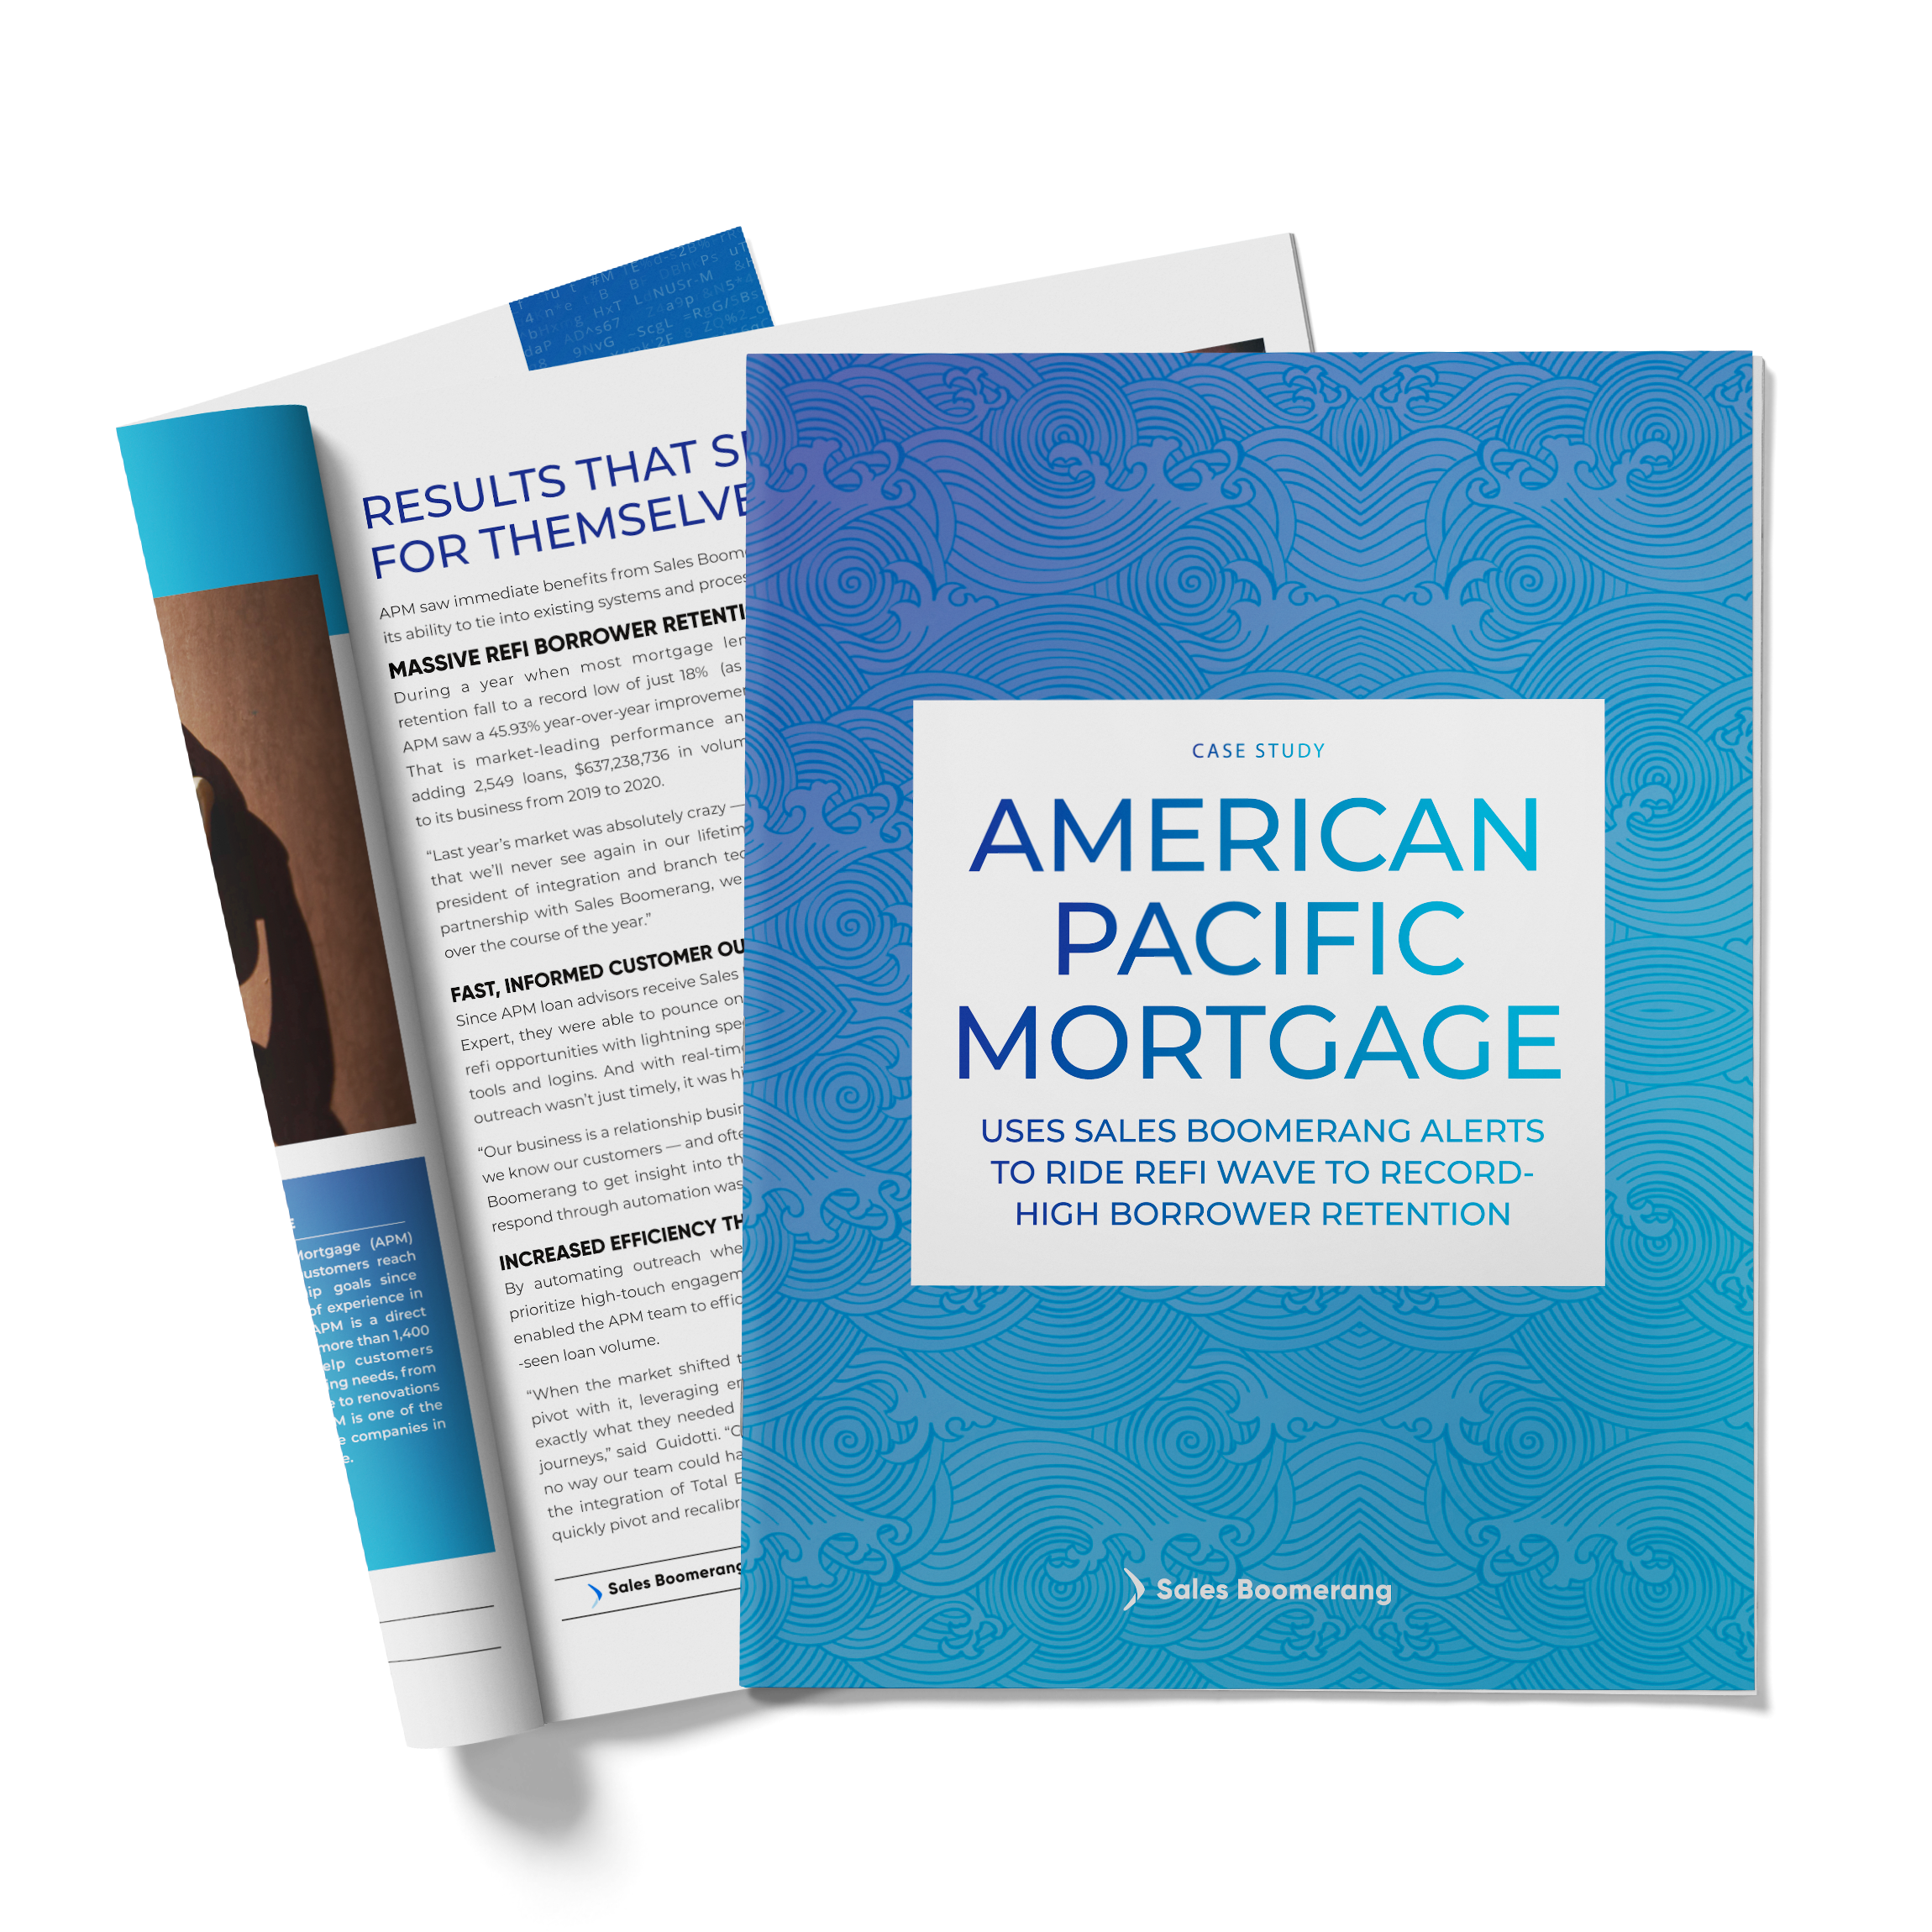 American Pacific Mortgage Case Study by Sales Boomerang